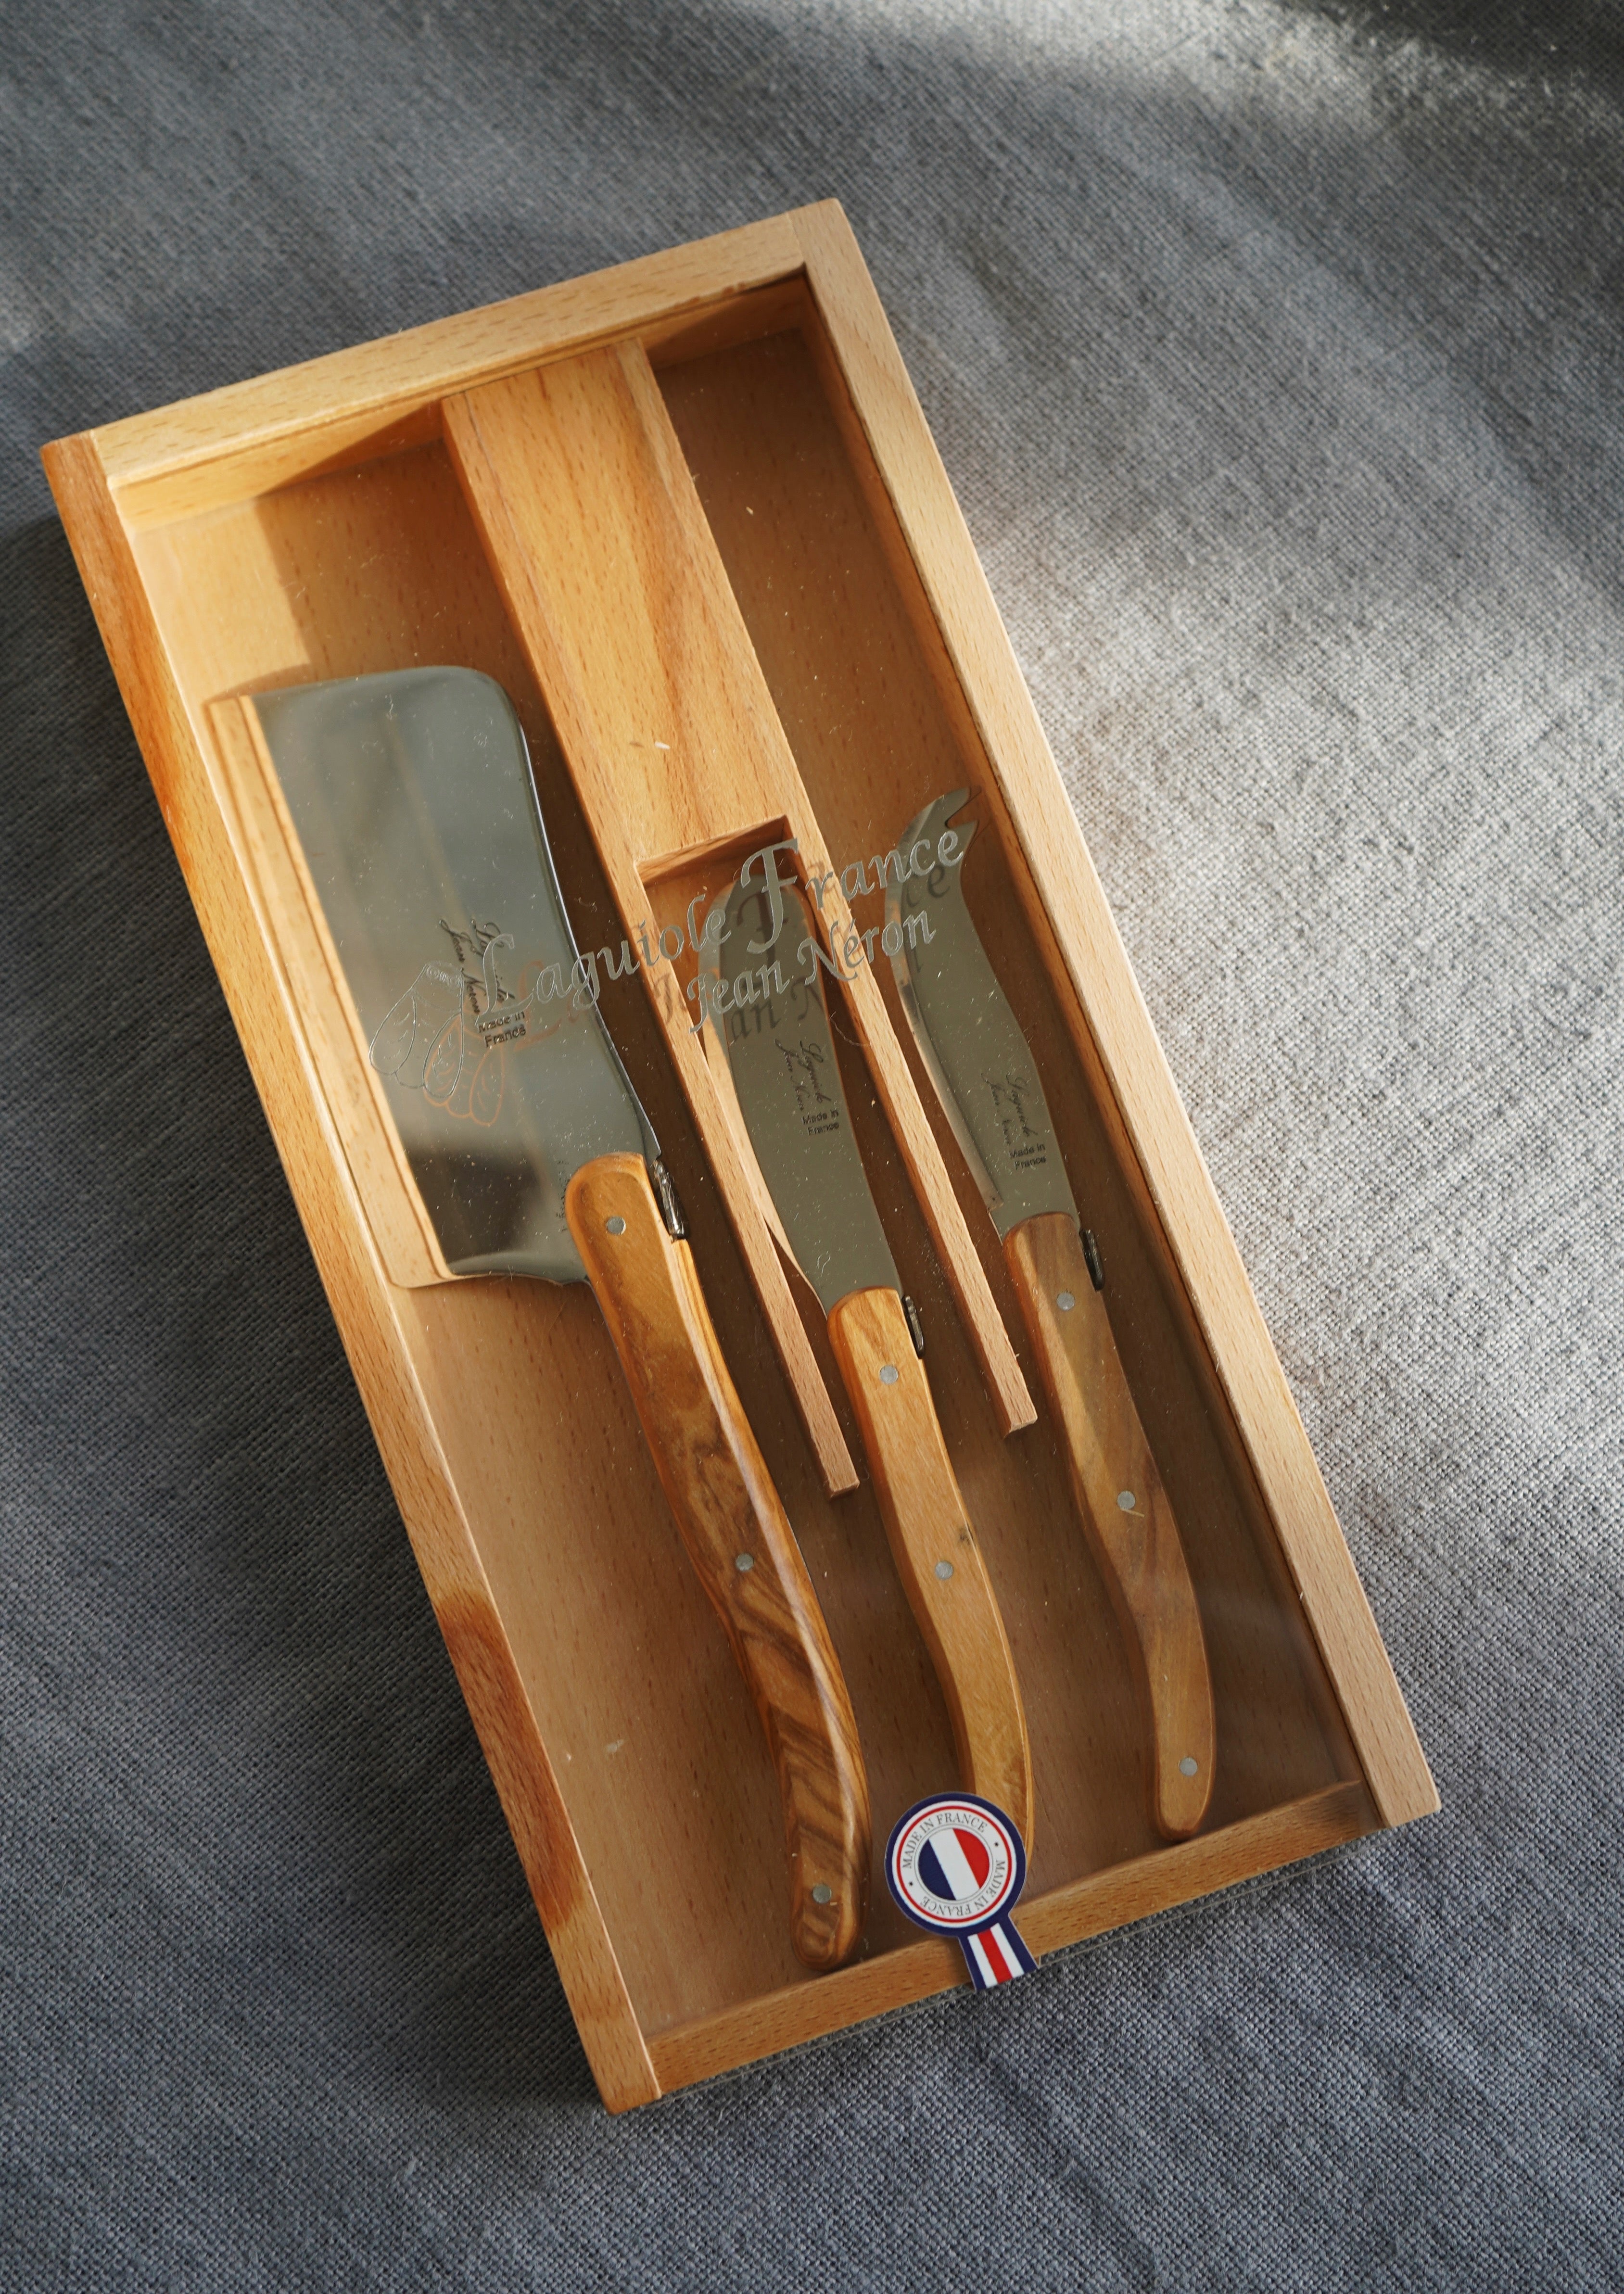 Laguiole Olivewood Large Cheese Set in Wood Box with Acrylic Lid (Set of 3) Cutlery Set Laguiole Brand_Laguiole Kitchen_Dinnerware Kitchen_Serveware Knife Sets Laguiole New Arrivals Spring Collection 35898A98-E3A4-44F5-8AA5-E741DB217791